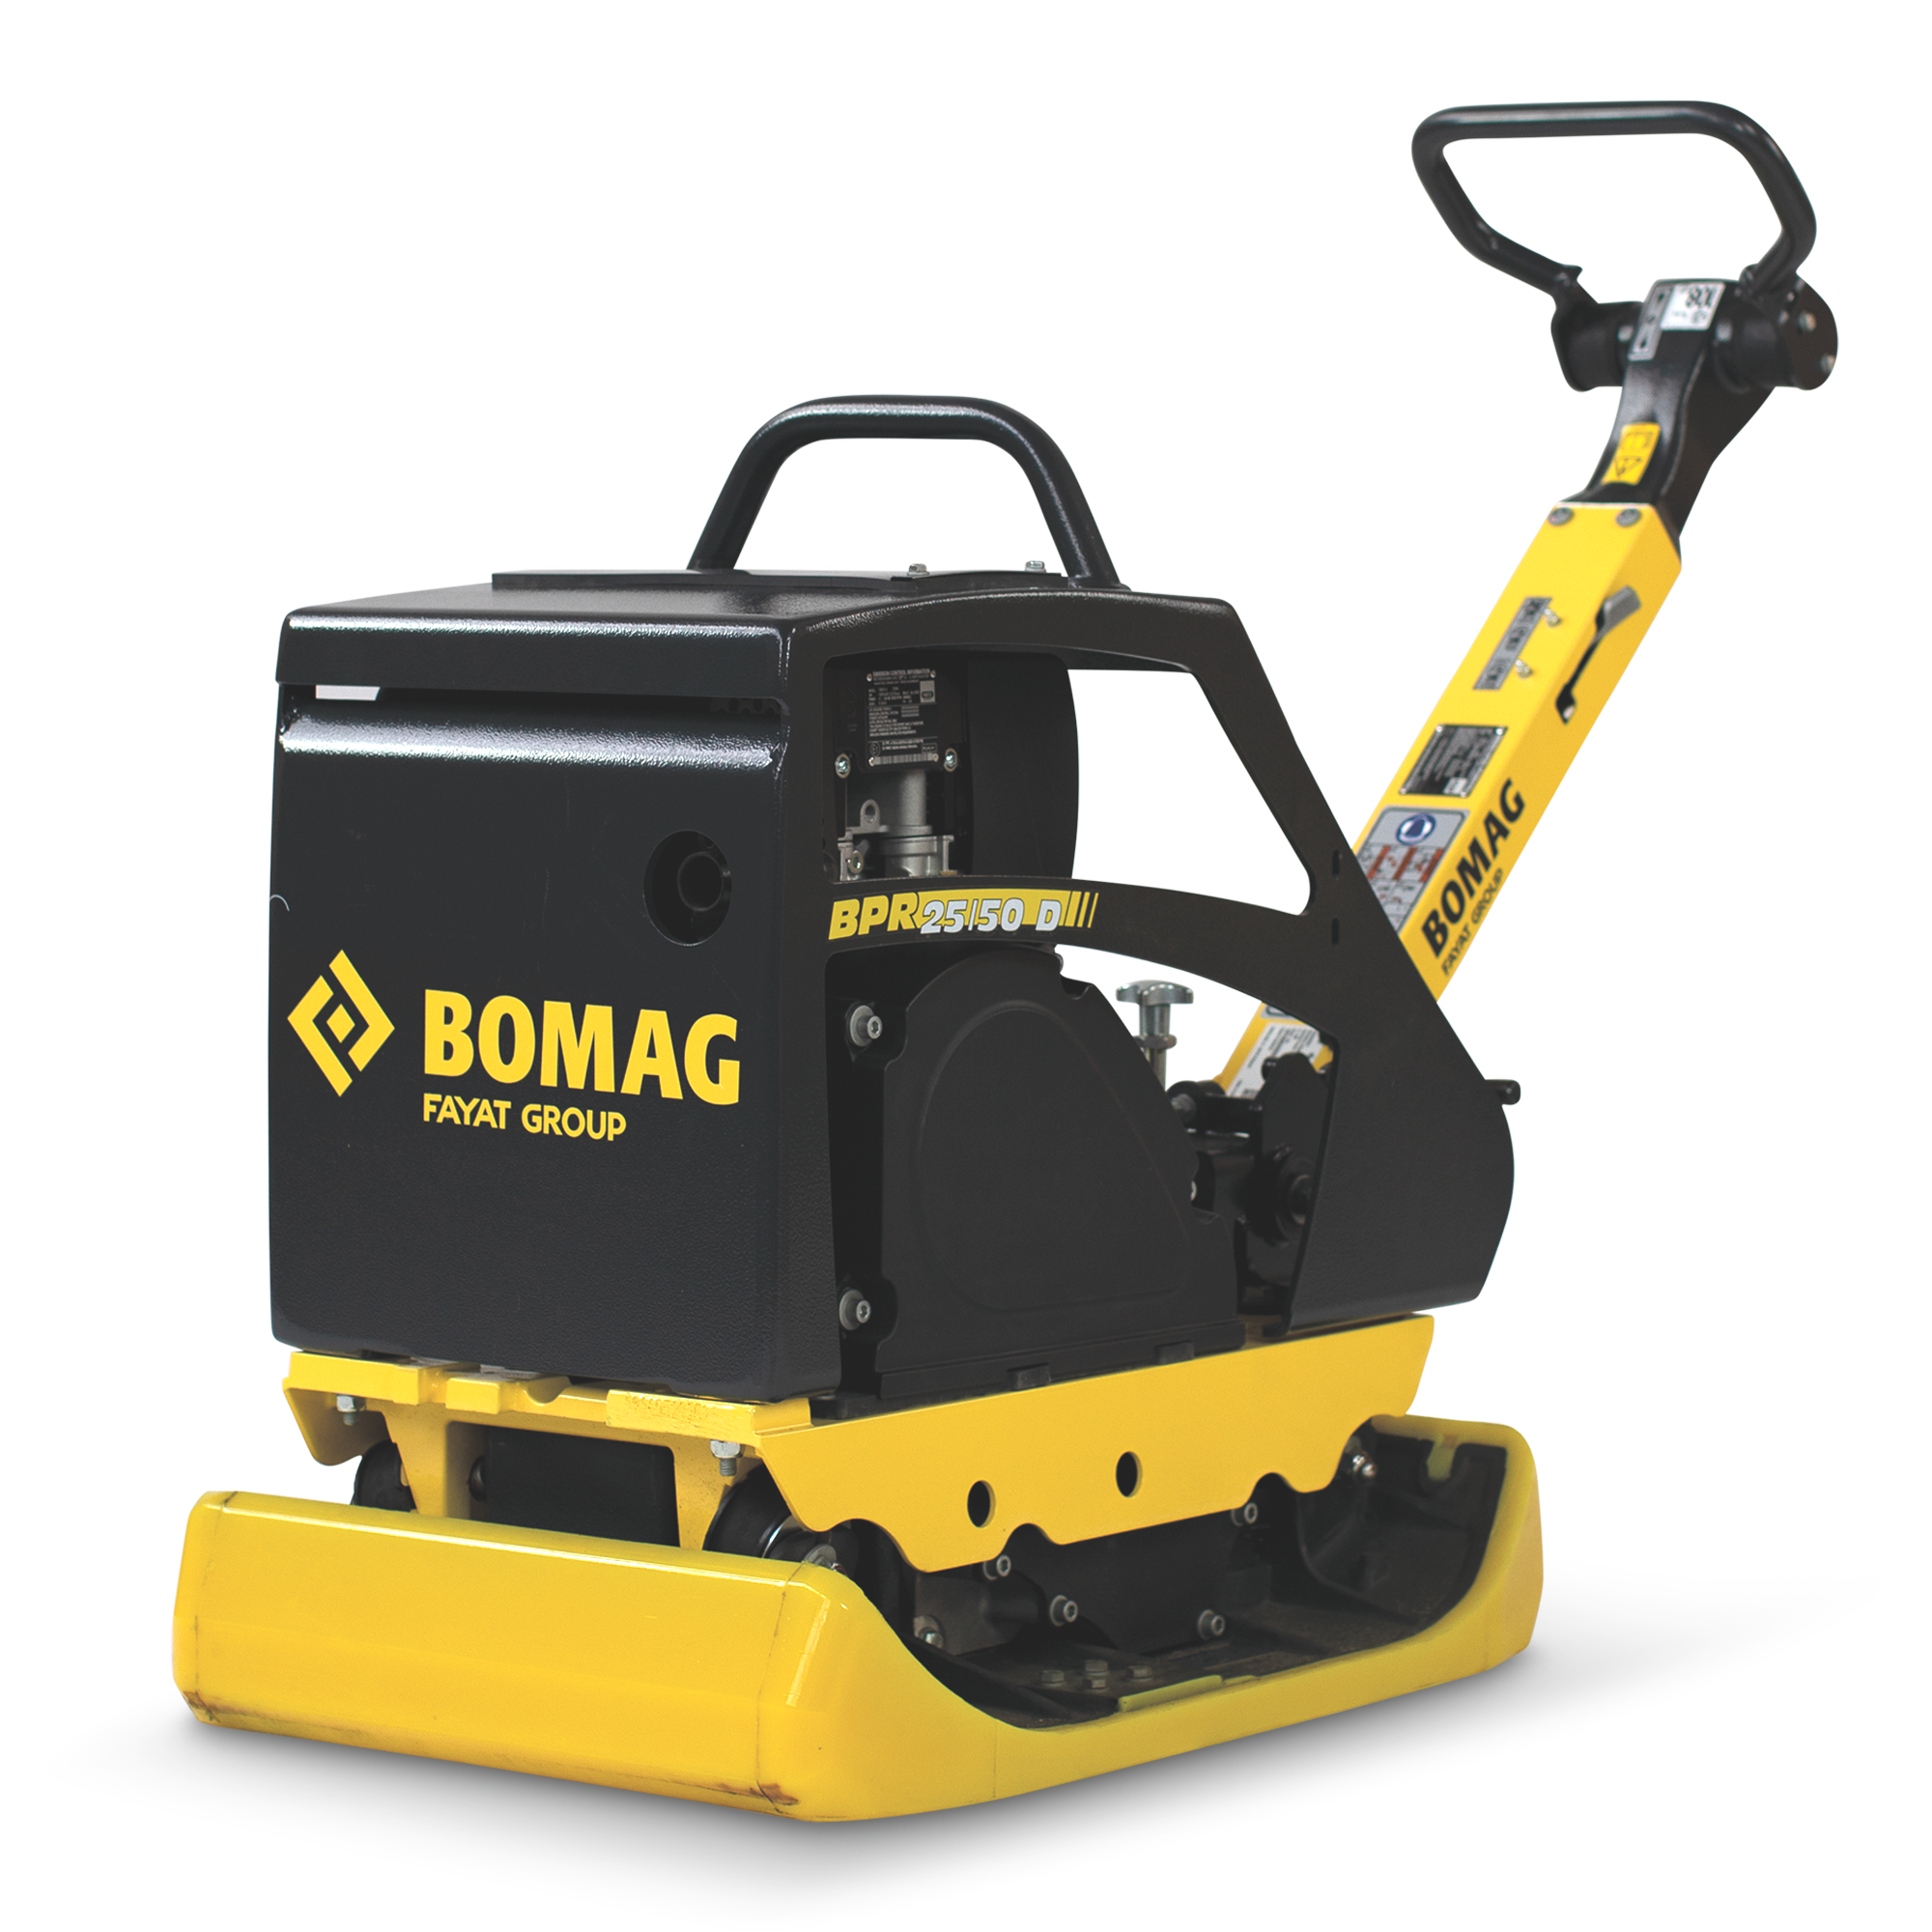 KKB Bomag Vibrating plate with stonegard 169 kg/25 kn BPR 25/50 D